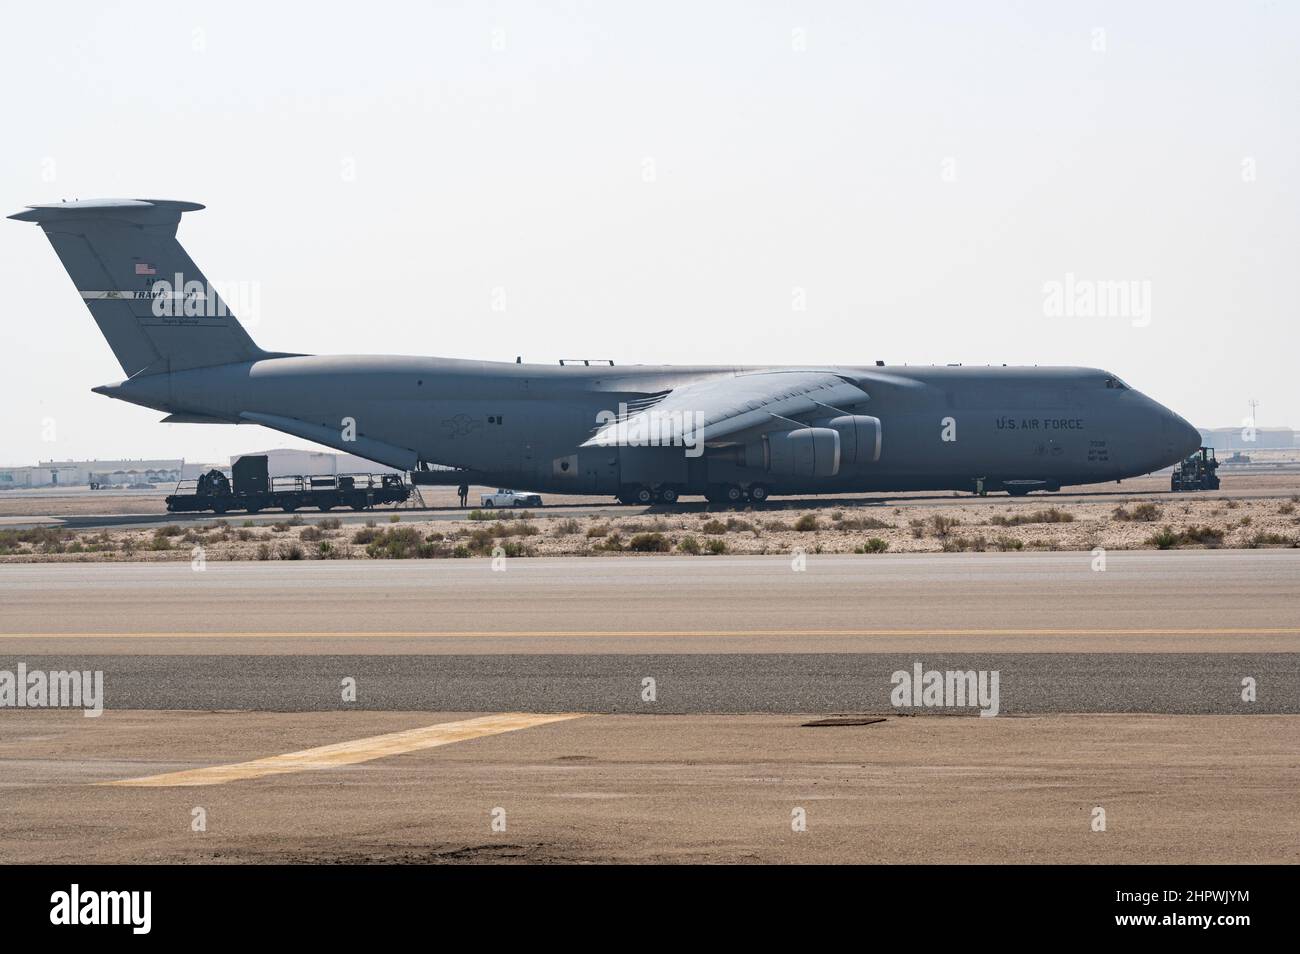 A U.S. Air Force C-5M Super Galaxy from the 60th Air Mobility Wing, Travis Air Force Base, takes on cargo at Al Dhafra Air Base, United Arab Emirates, Feb. 16, 2022. The C-5 is a strategic transport aircraft used to transport cargo and personnel for the Department of Defense. (U.S. Air Force photo by Staff Sgt. Nicholas Ross) Stock Photo